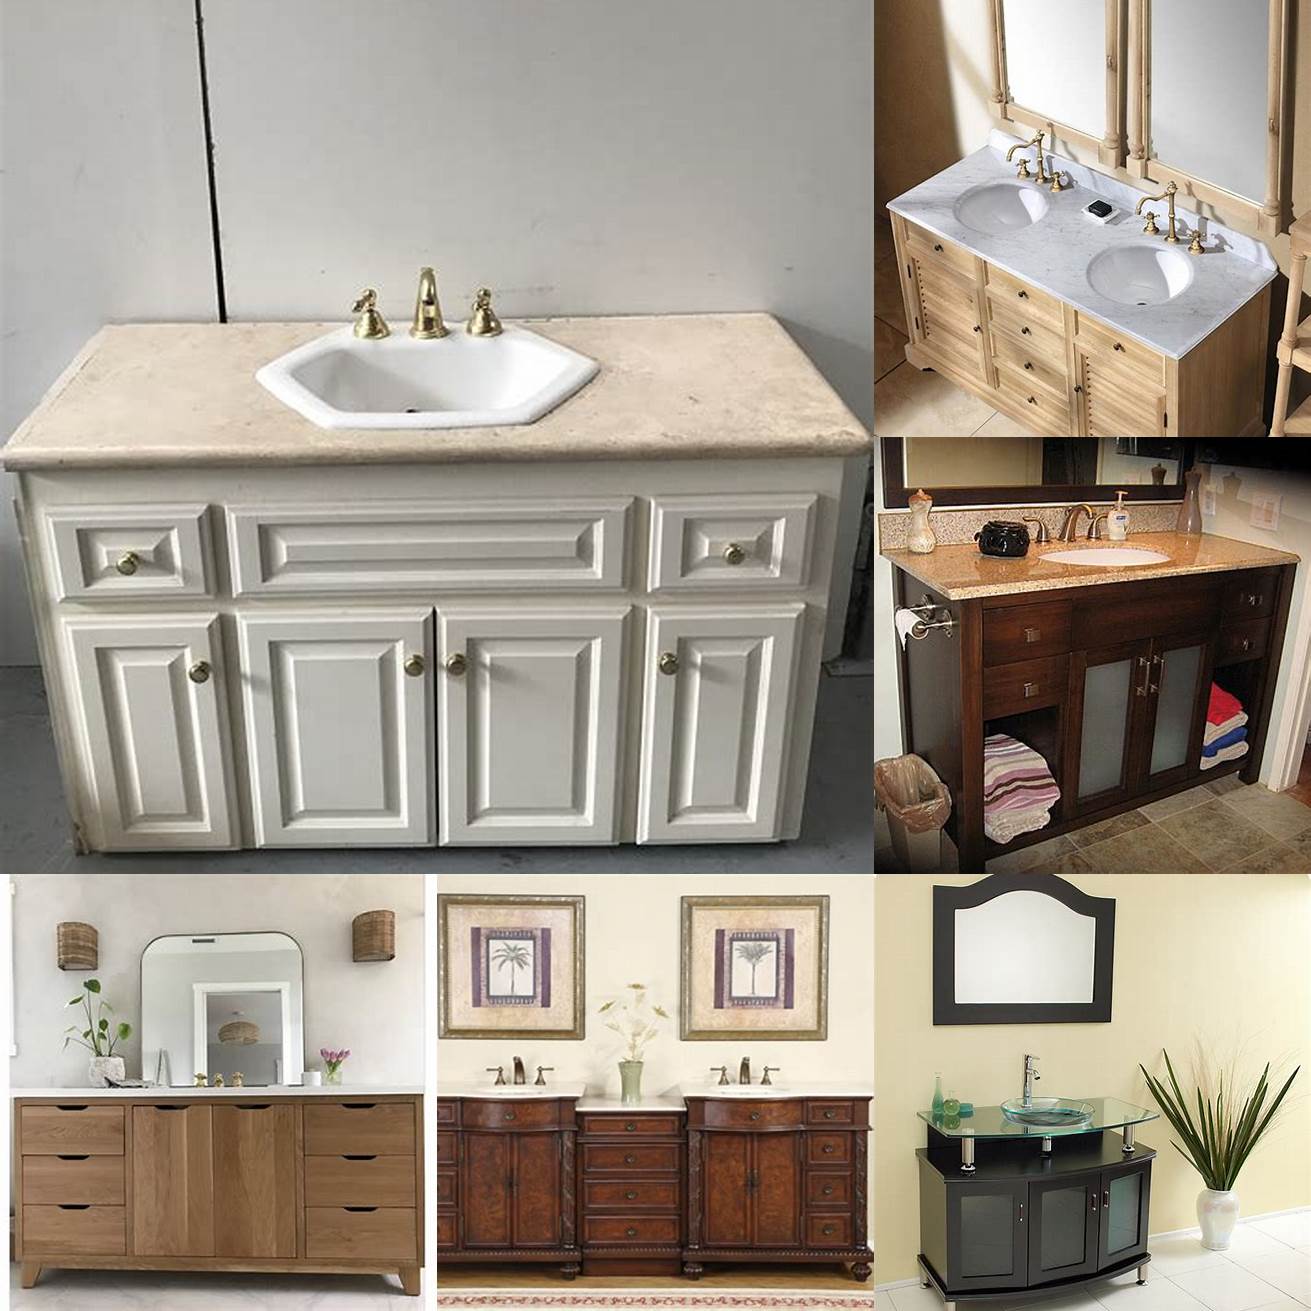 Quick Delivery Bathroom Vanity San Diego offers fast and reliable delivery so you can enjoy your new vanity as soon as possible